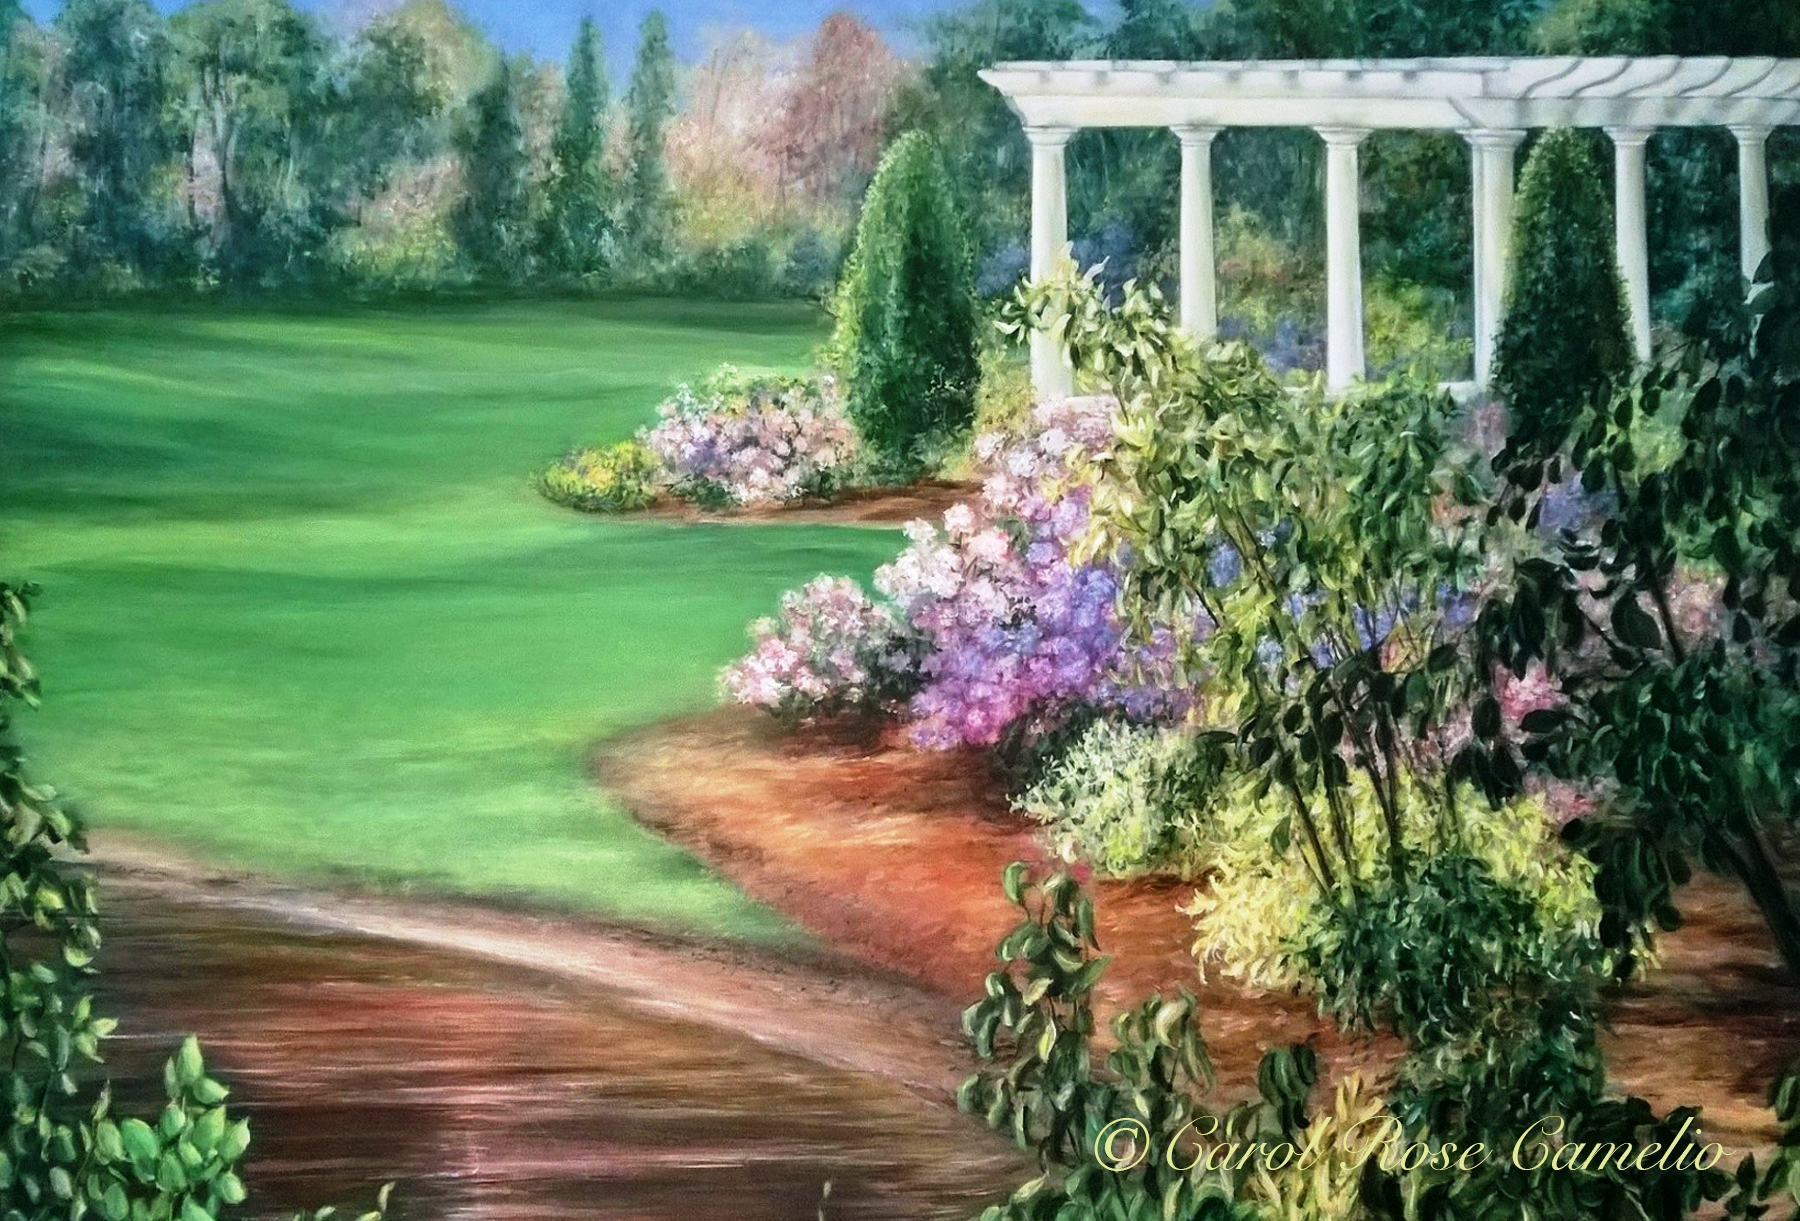 Vineyard Garden: A colorful, well-kept garden next to a pond, featuring a white pergola with round columns.